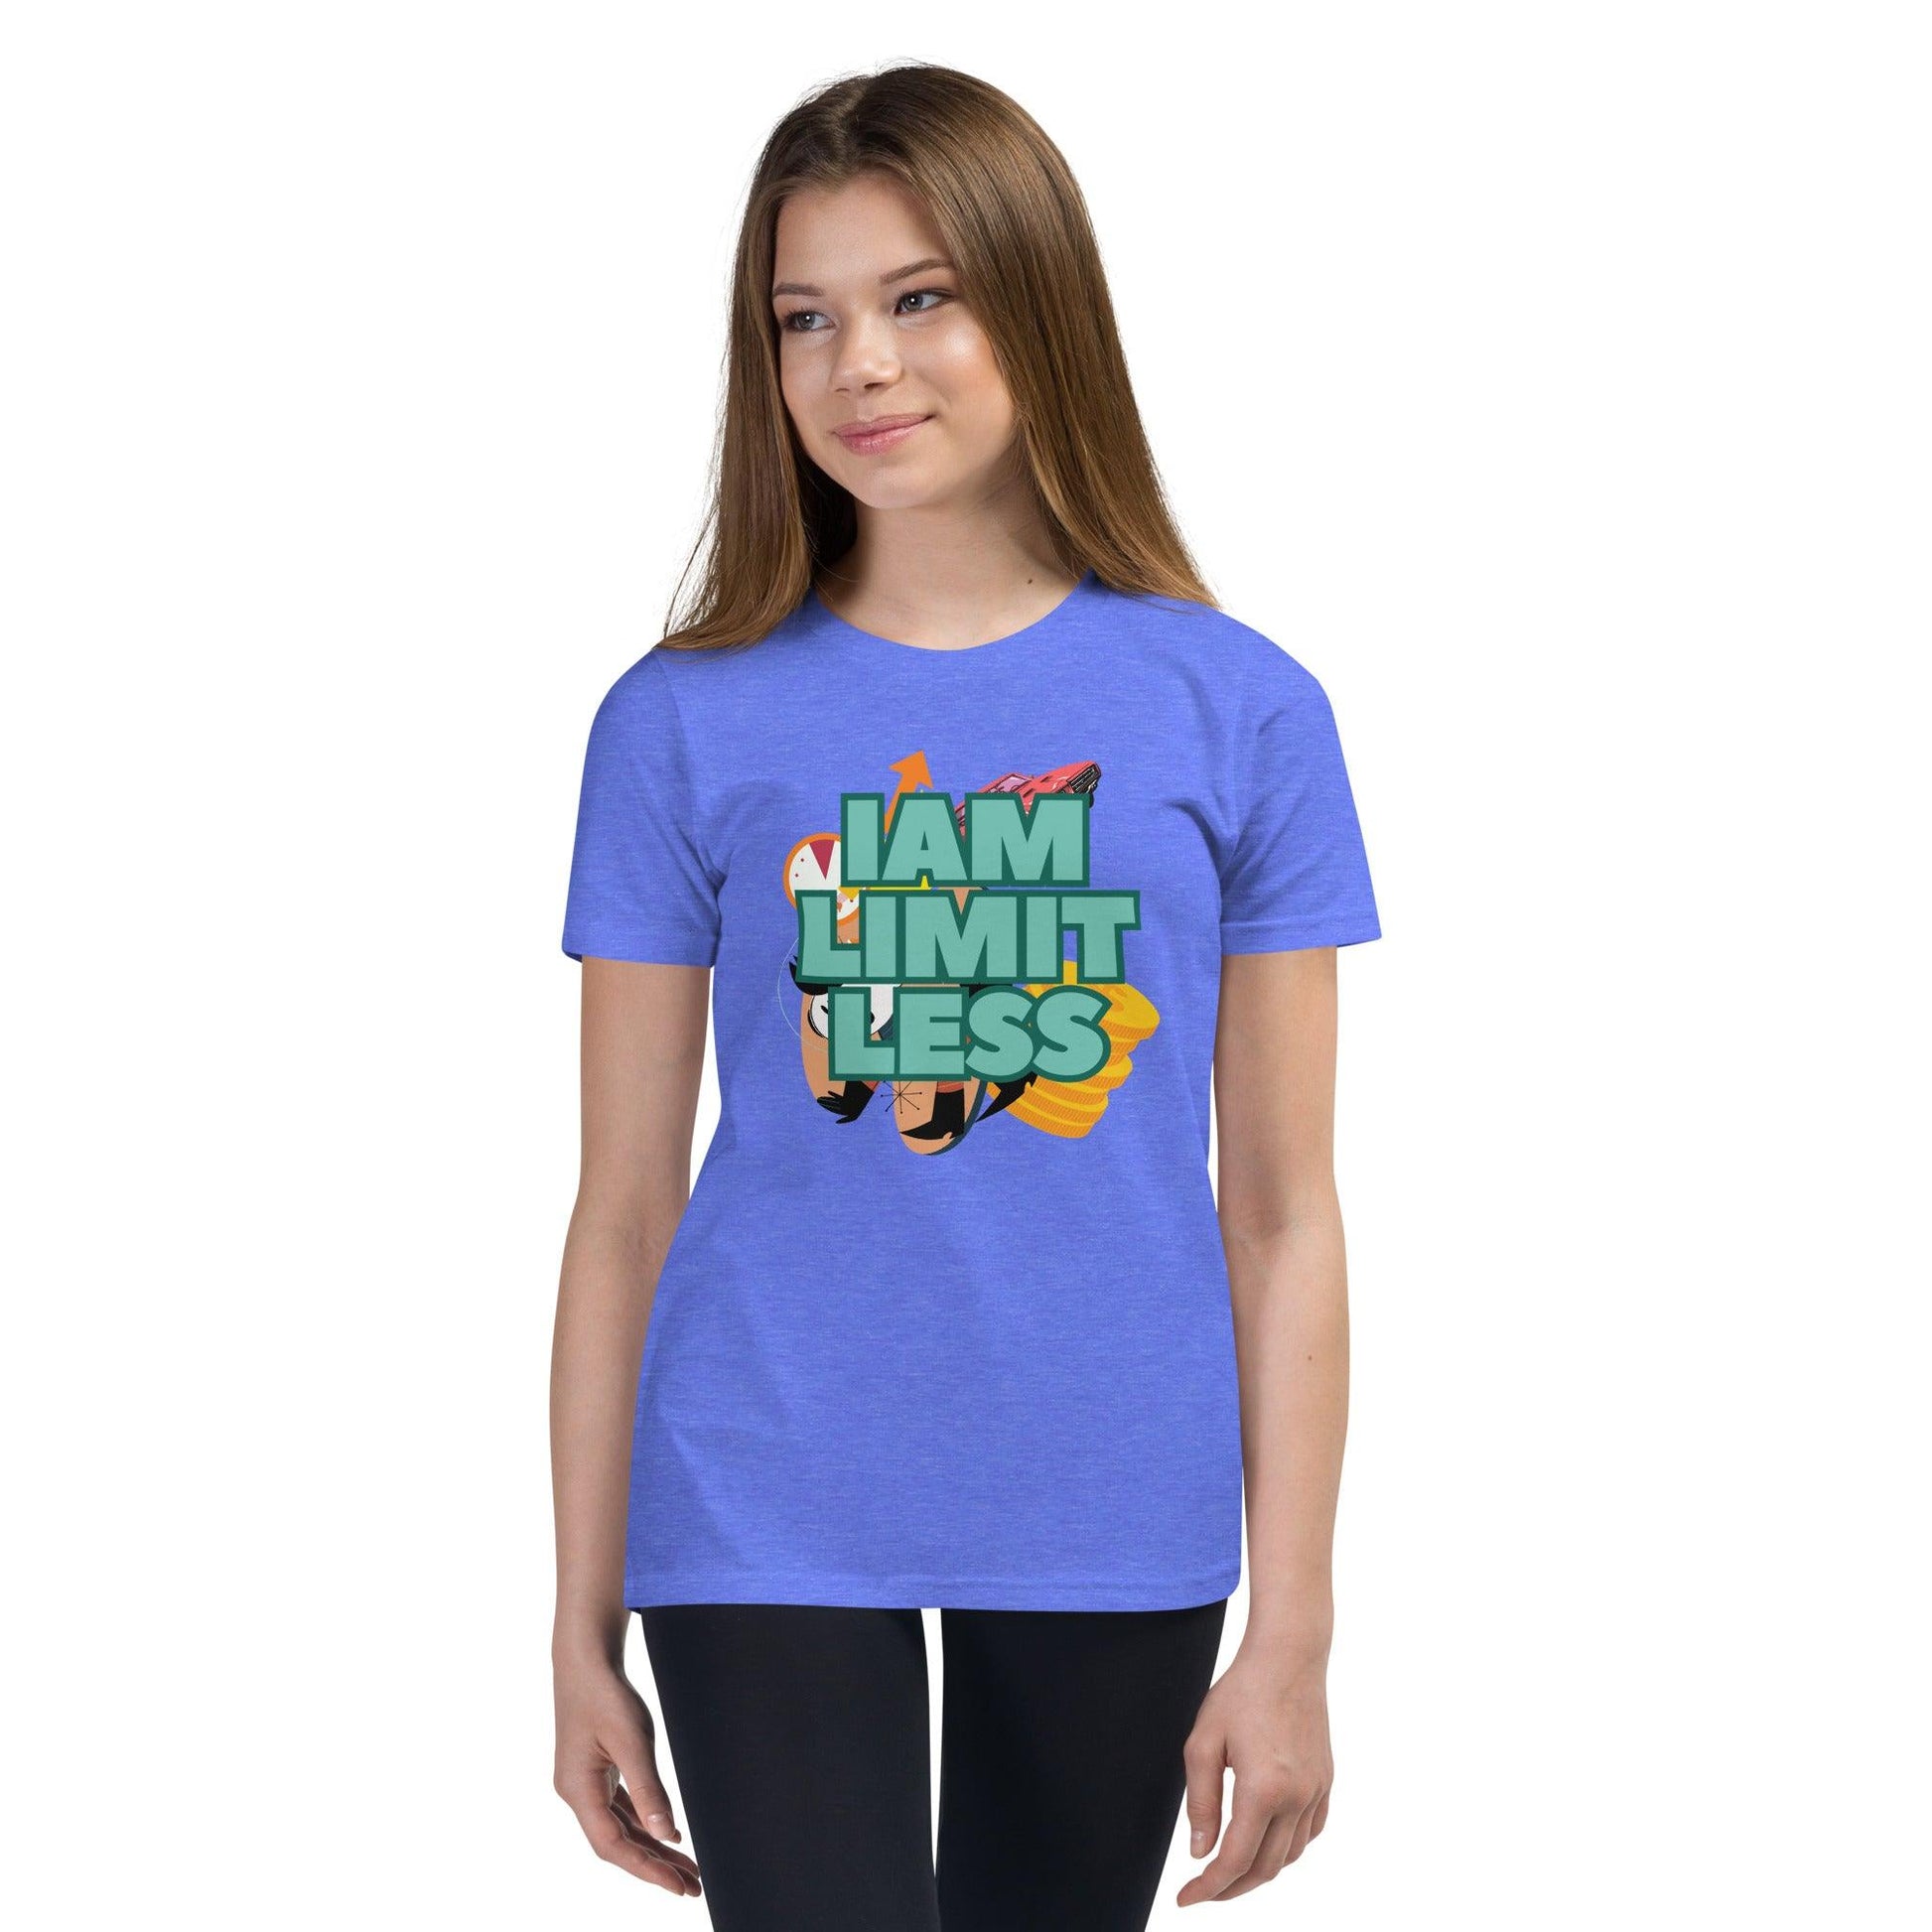 I Am Limitless | Youth Short Sleeve T-Shirt | Youth Positive Affirmation T-Shirt - Affirm Effect